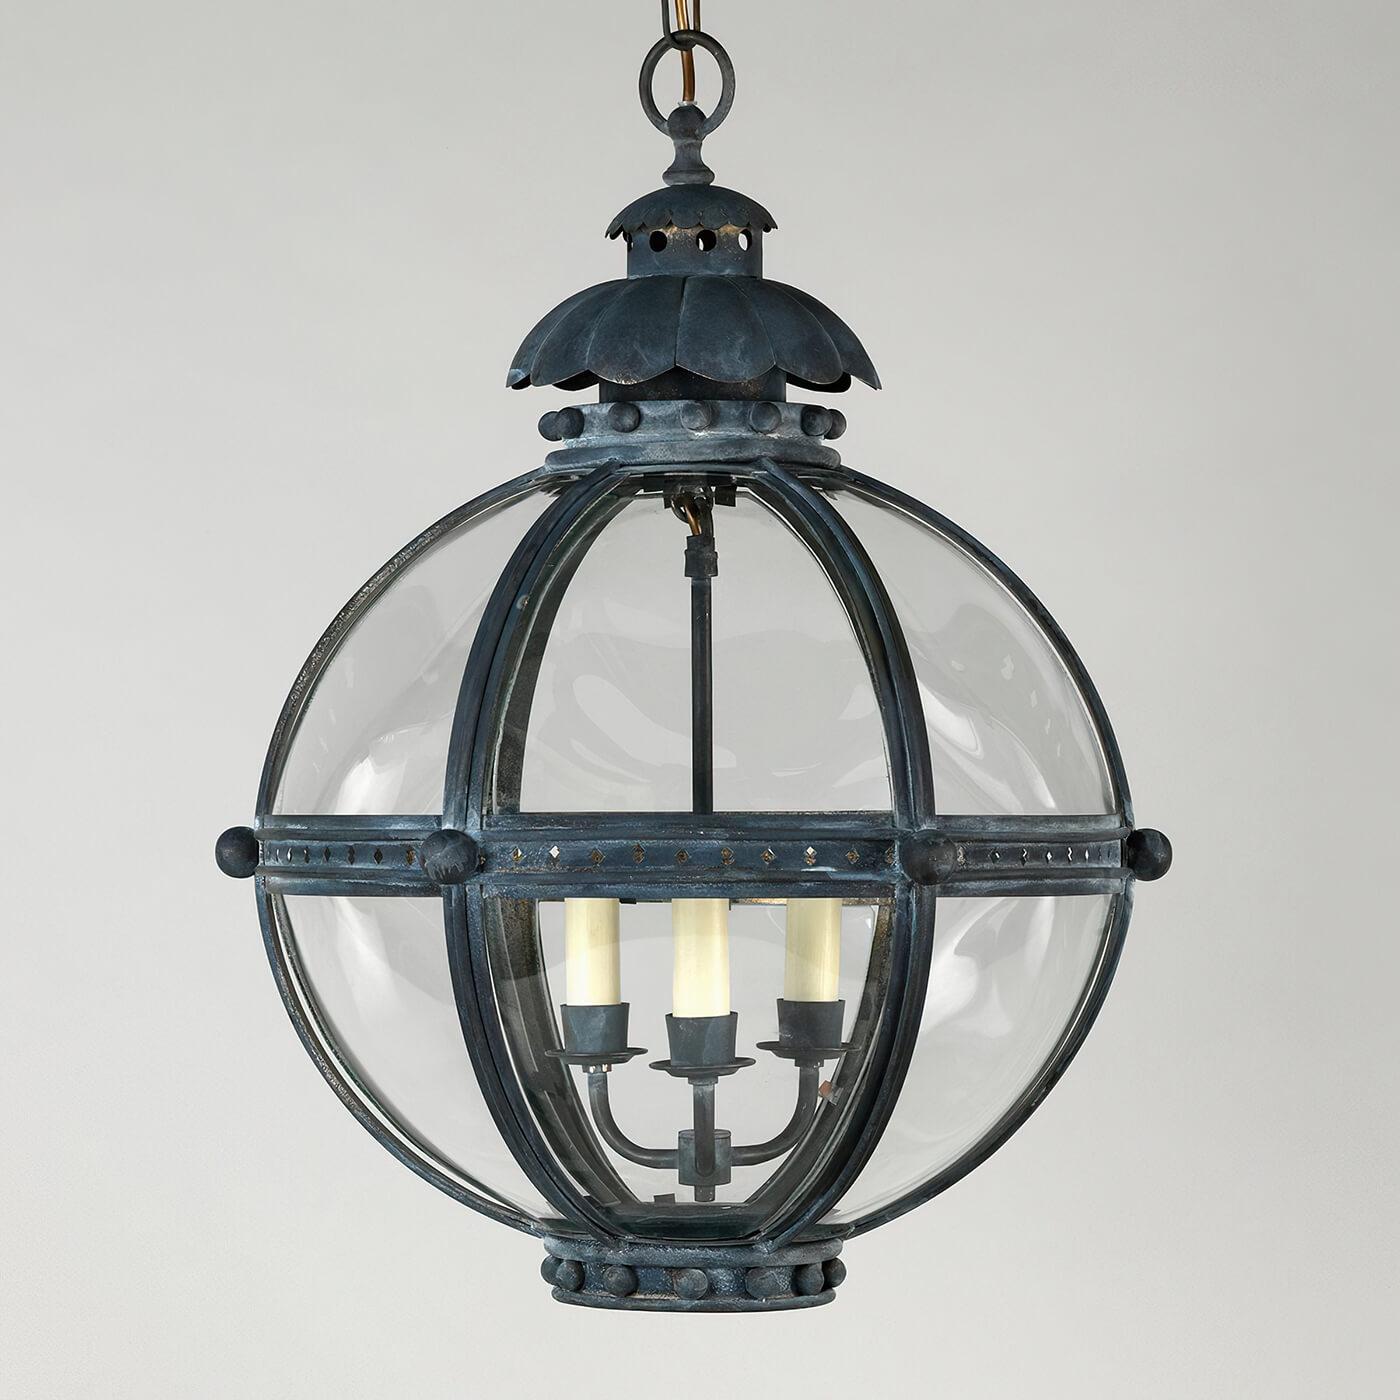 The Globe Lantern is based on a similar 19th-century antique. The globe shape of the fixture emanates strength and is united by the solid zinc finish finials and acanthus top.

The lantern is hand-fabricated from bronzed brass and curved glass